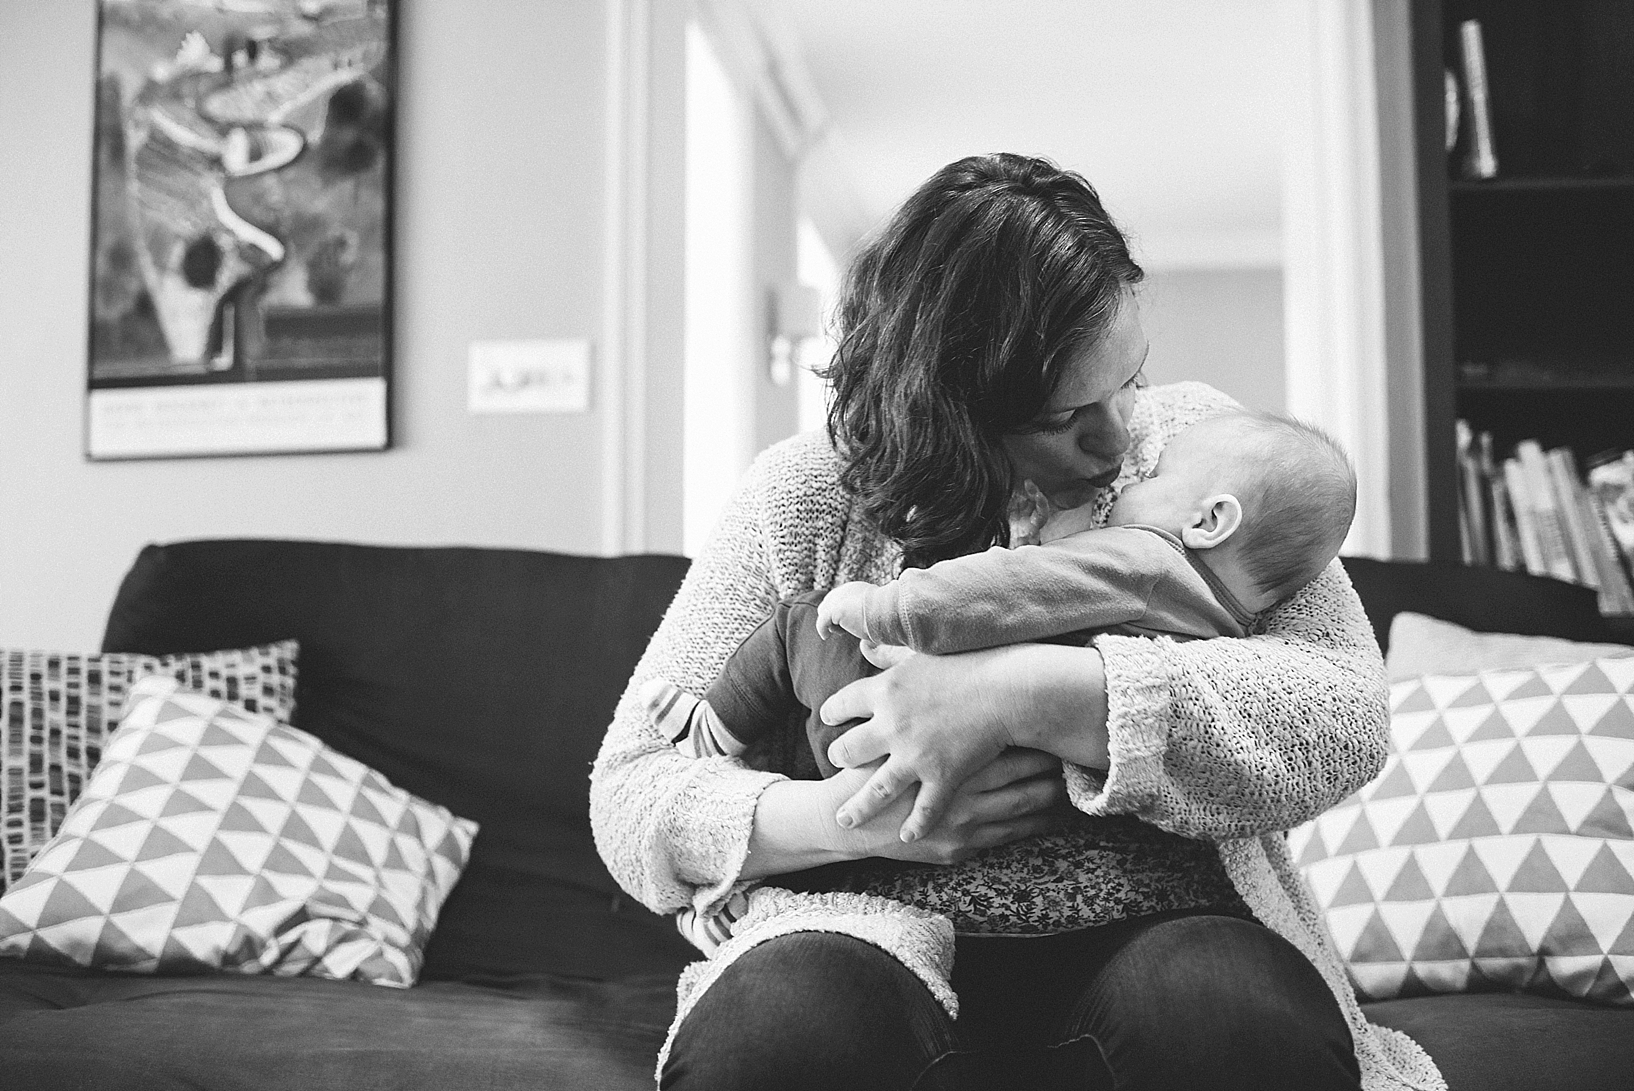 woman holding infant in her arms sitting on couch